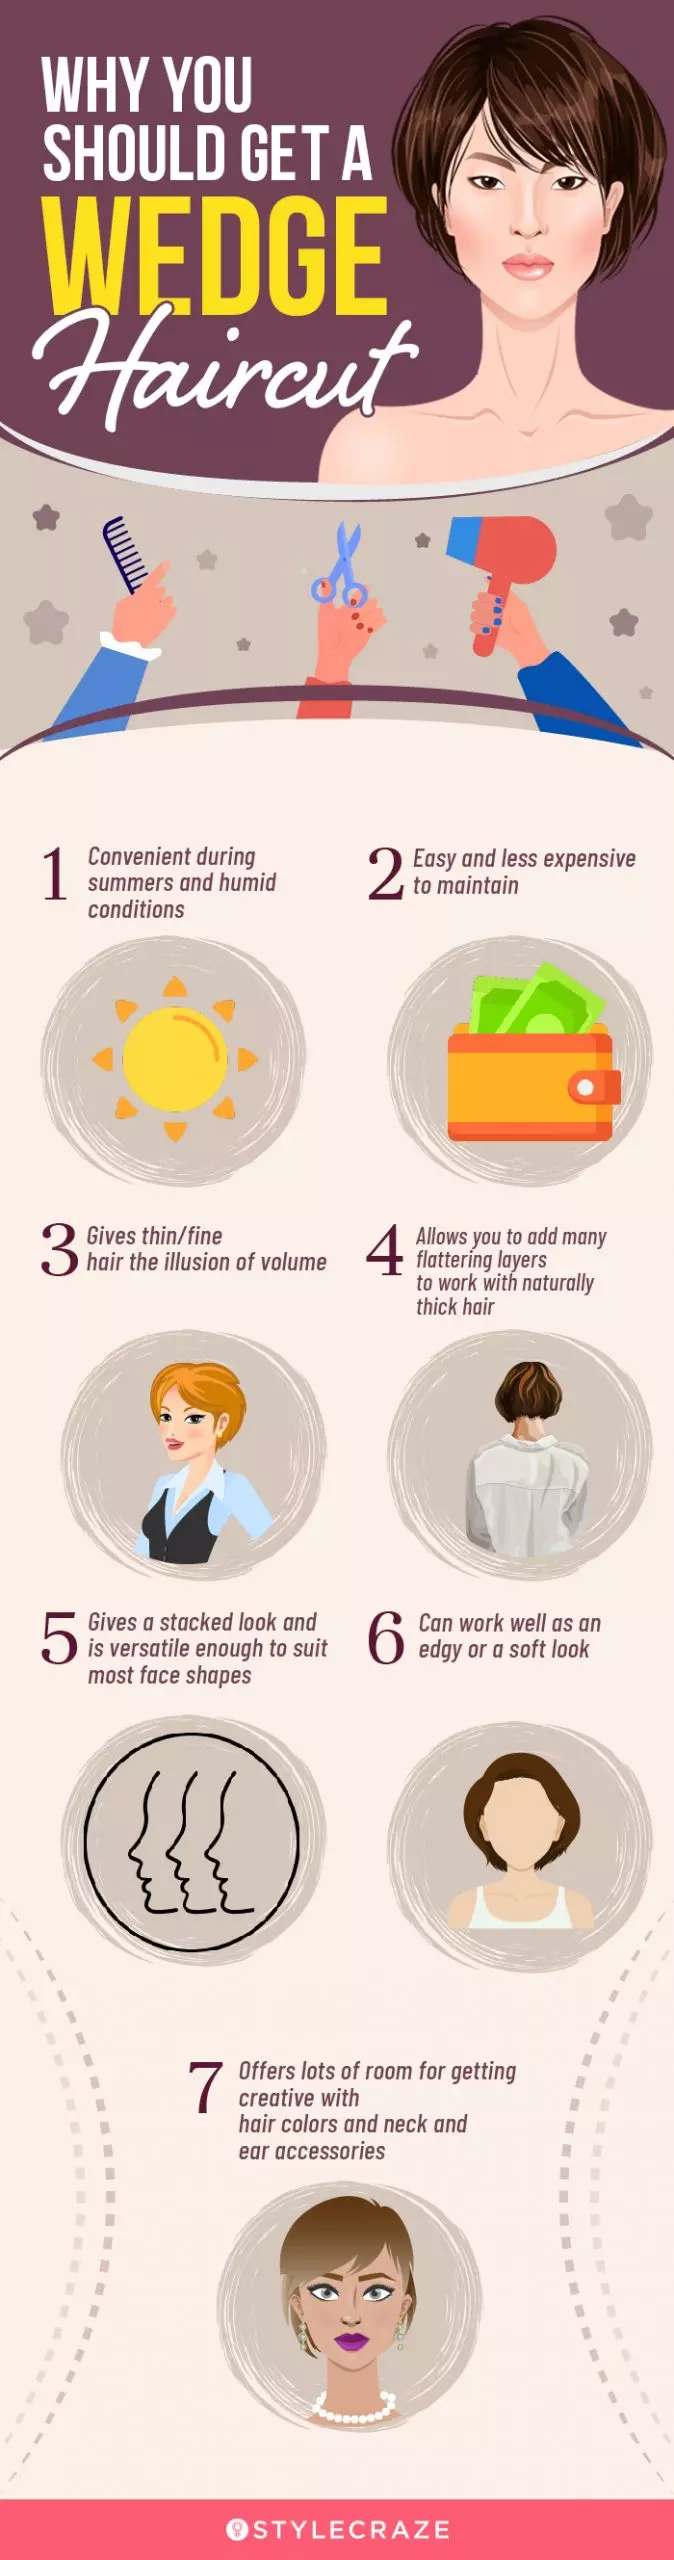 why you should get a wedge haircut (infographic)